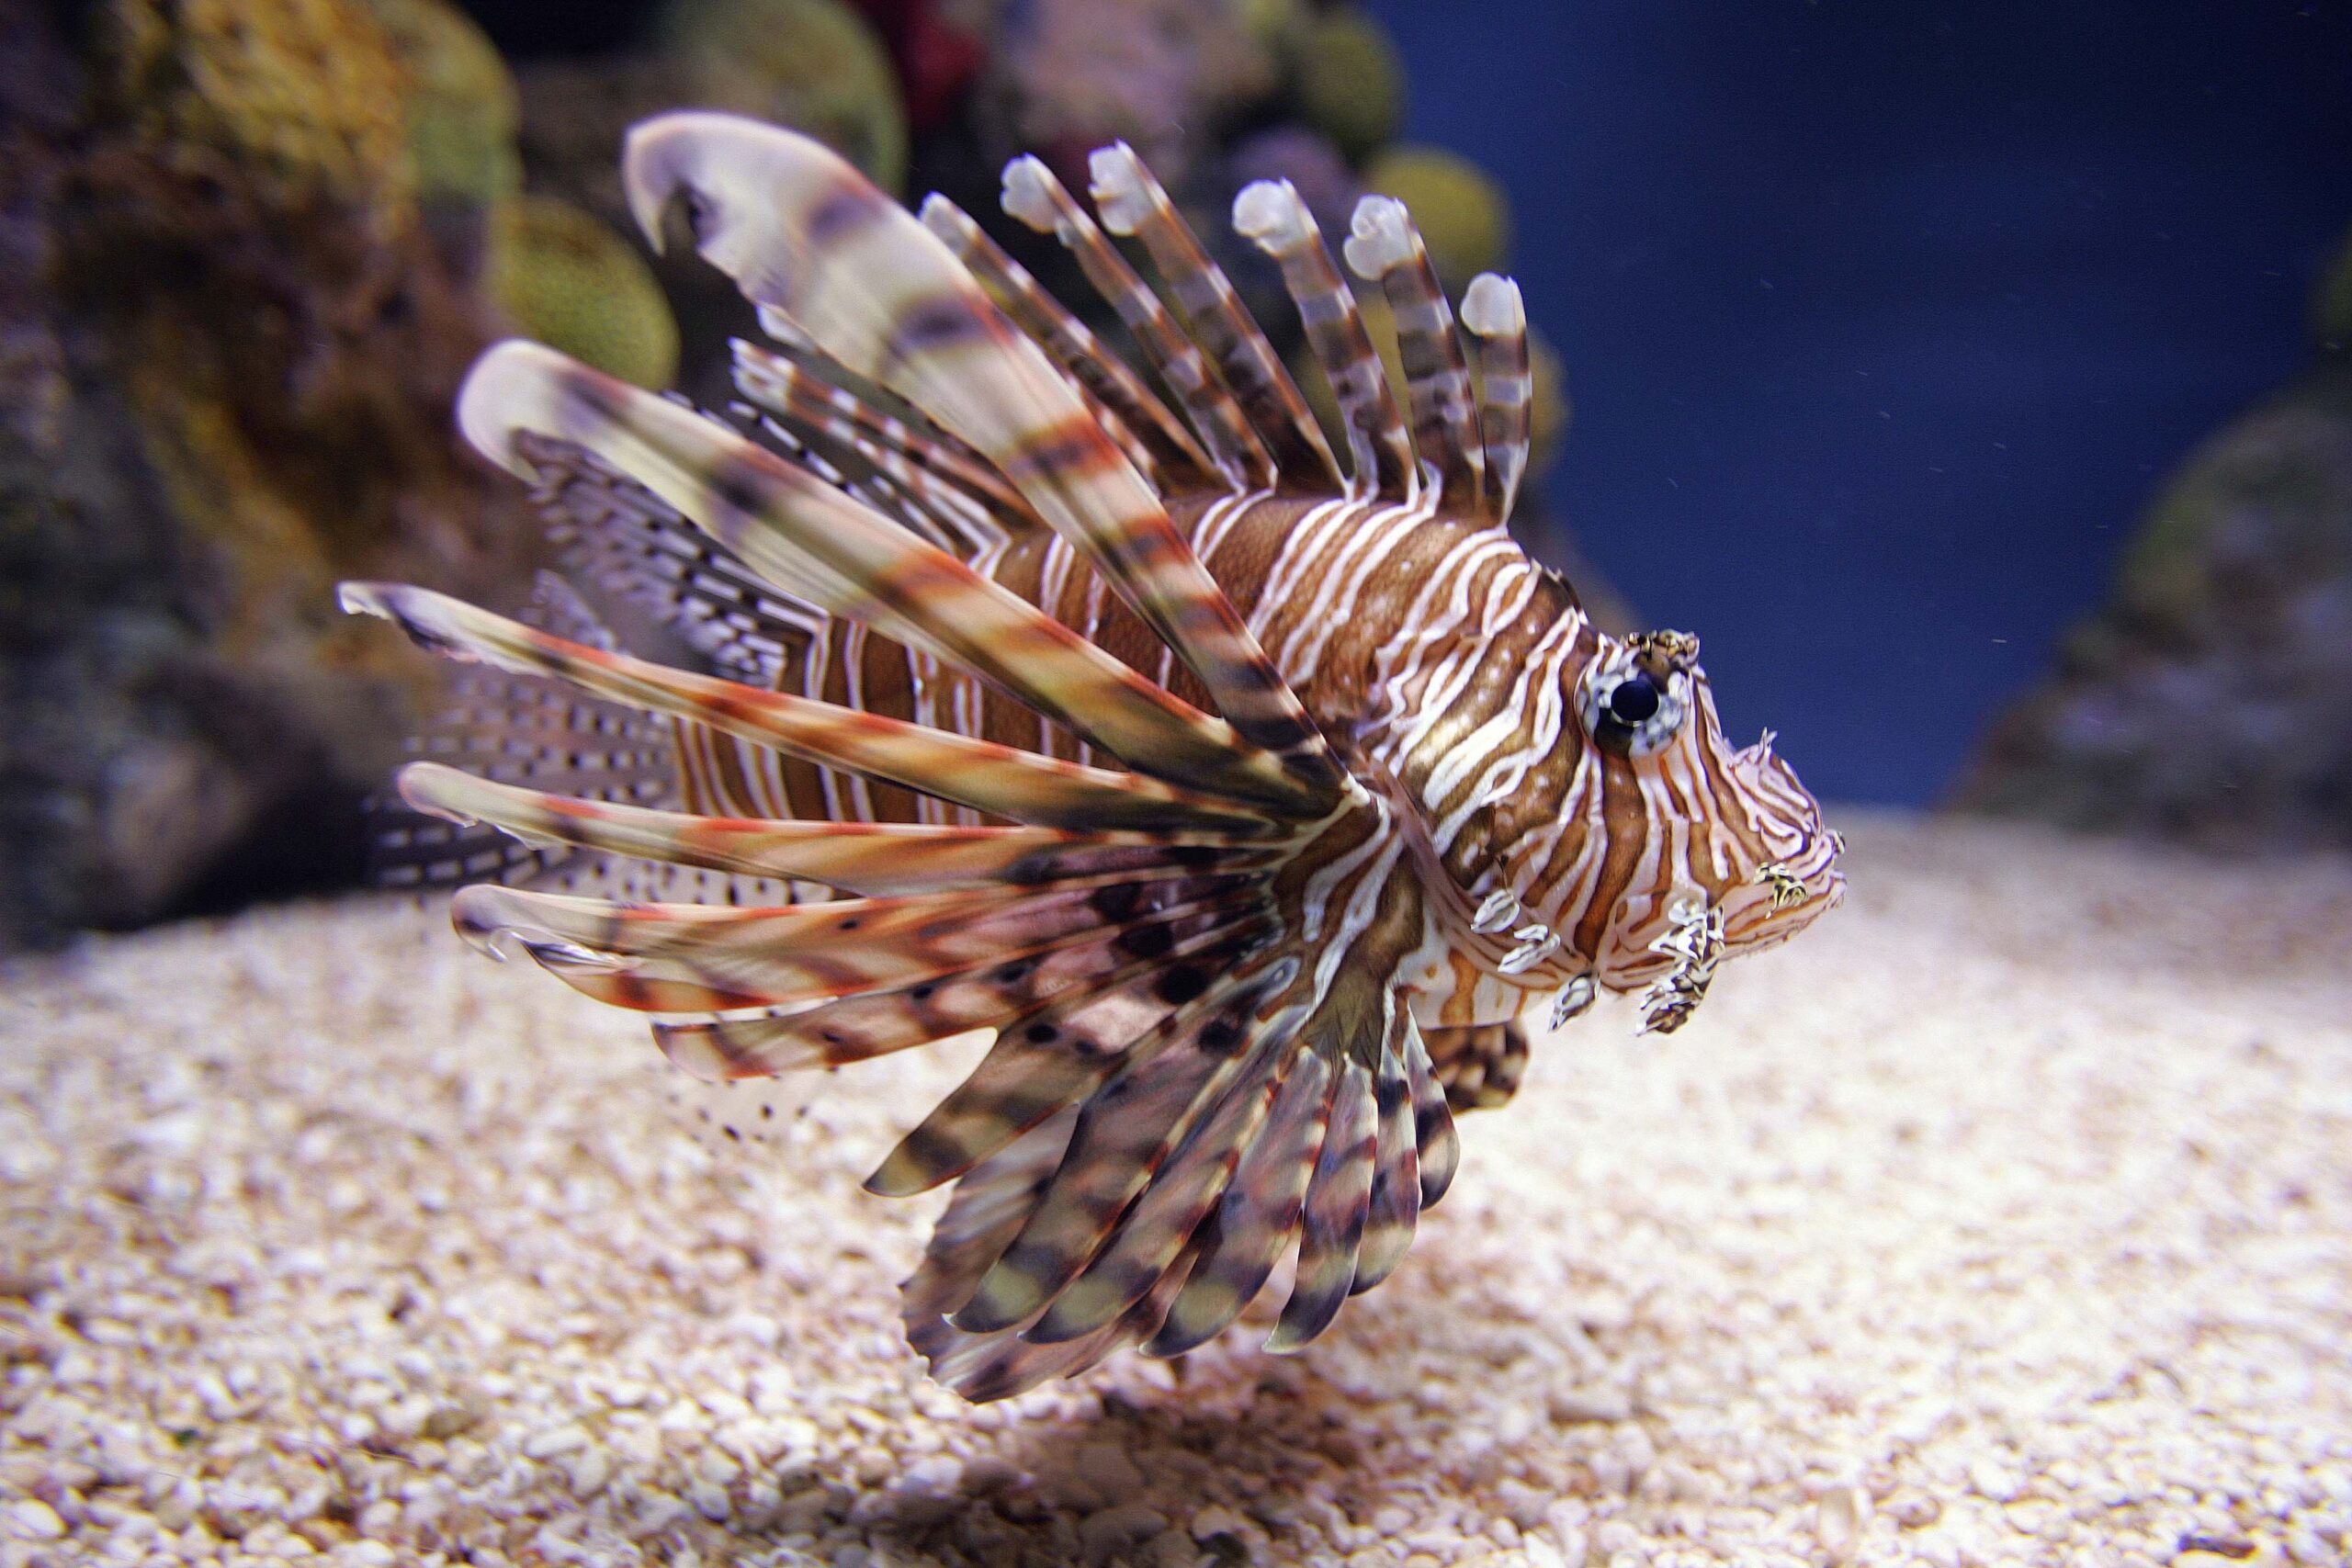 A spikey, striped lionfish swims in a tank.